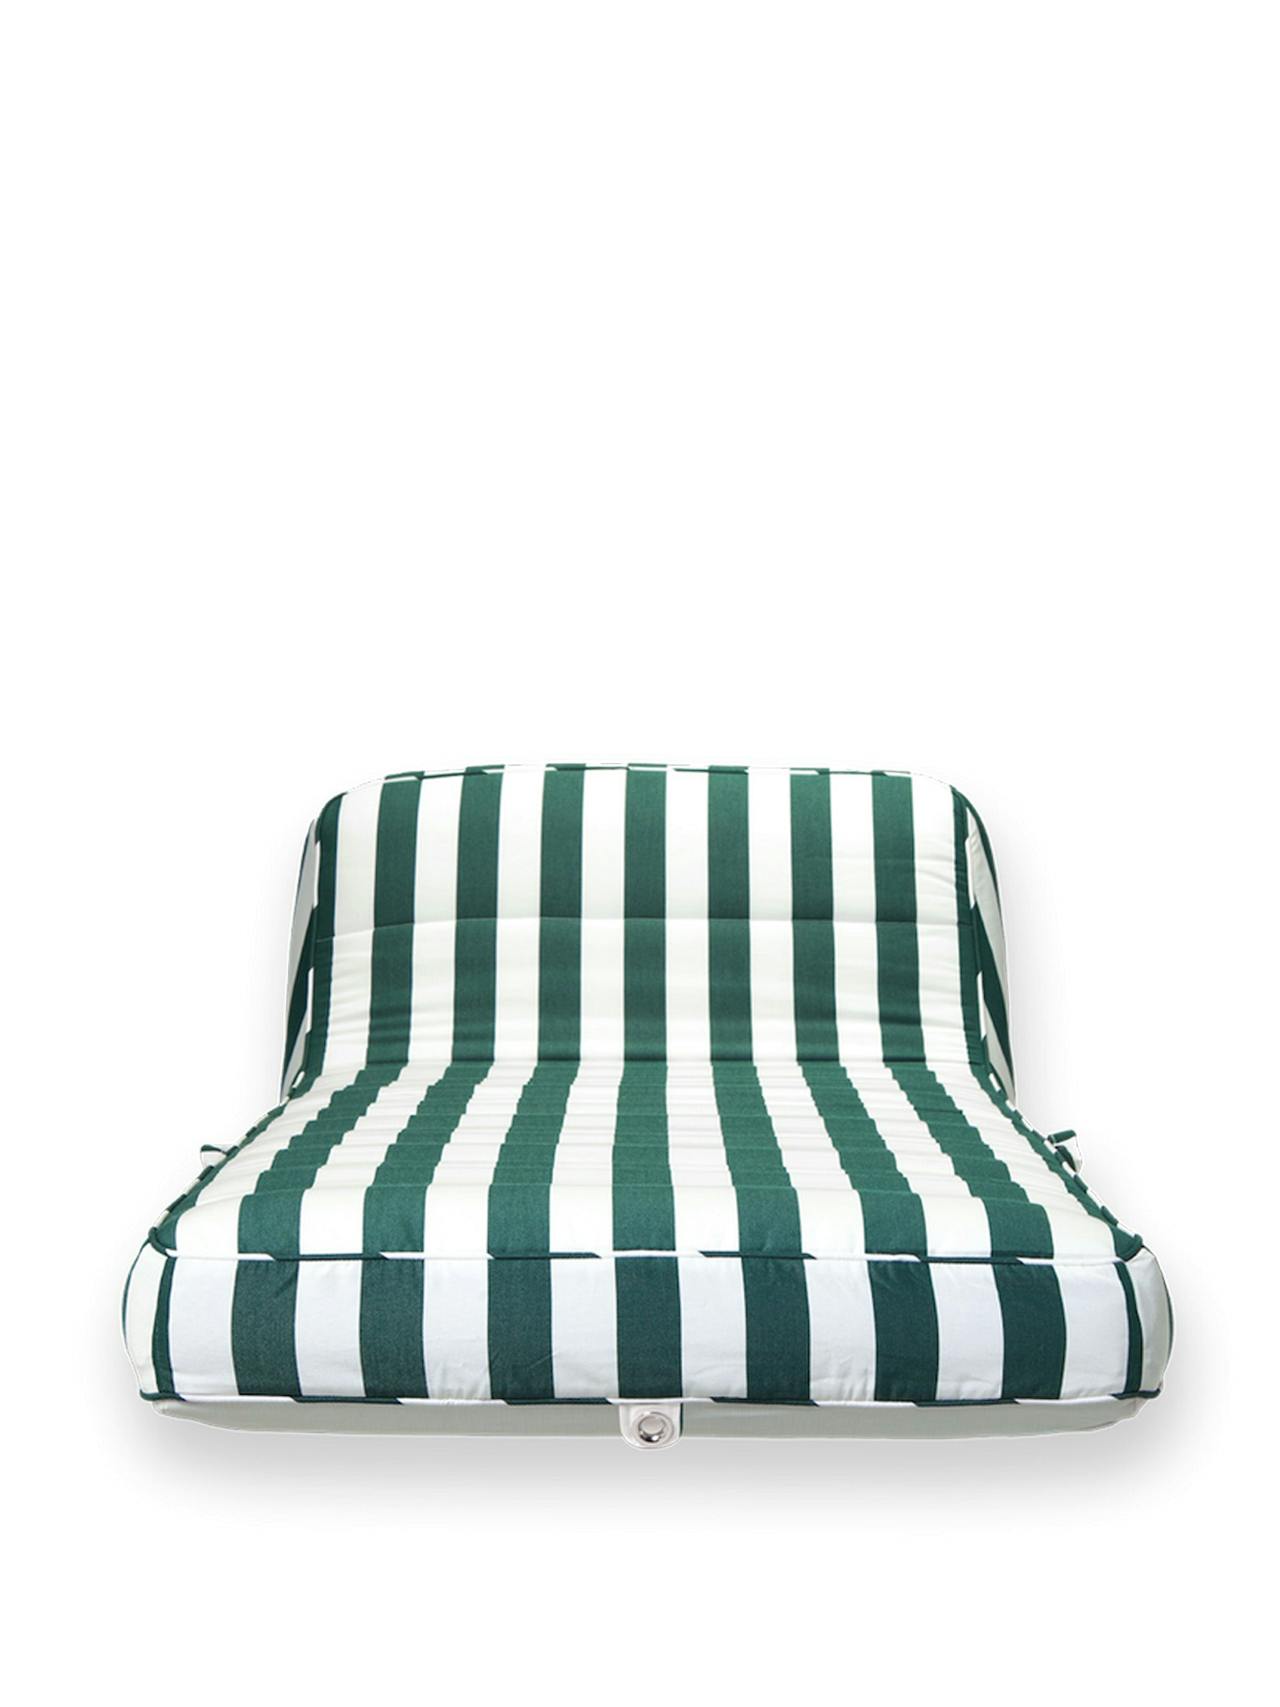 Green and white stripe pool float